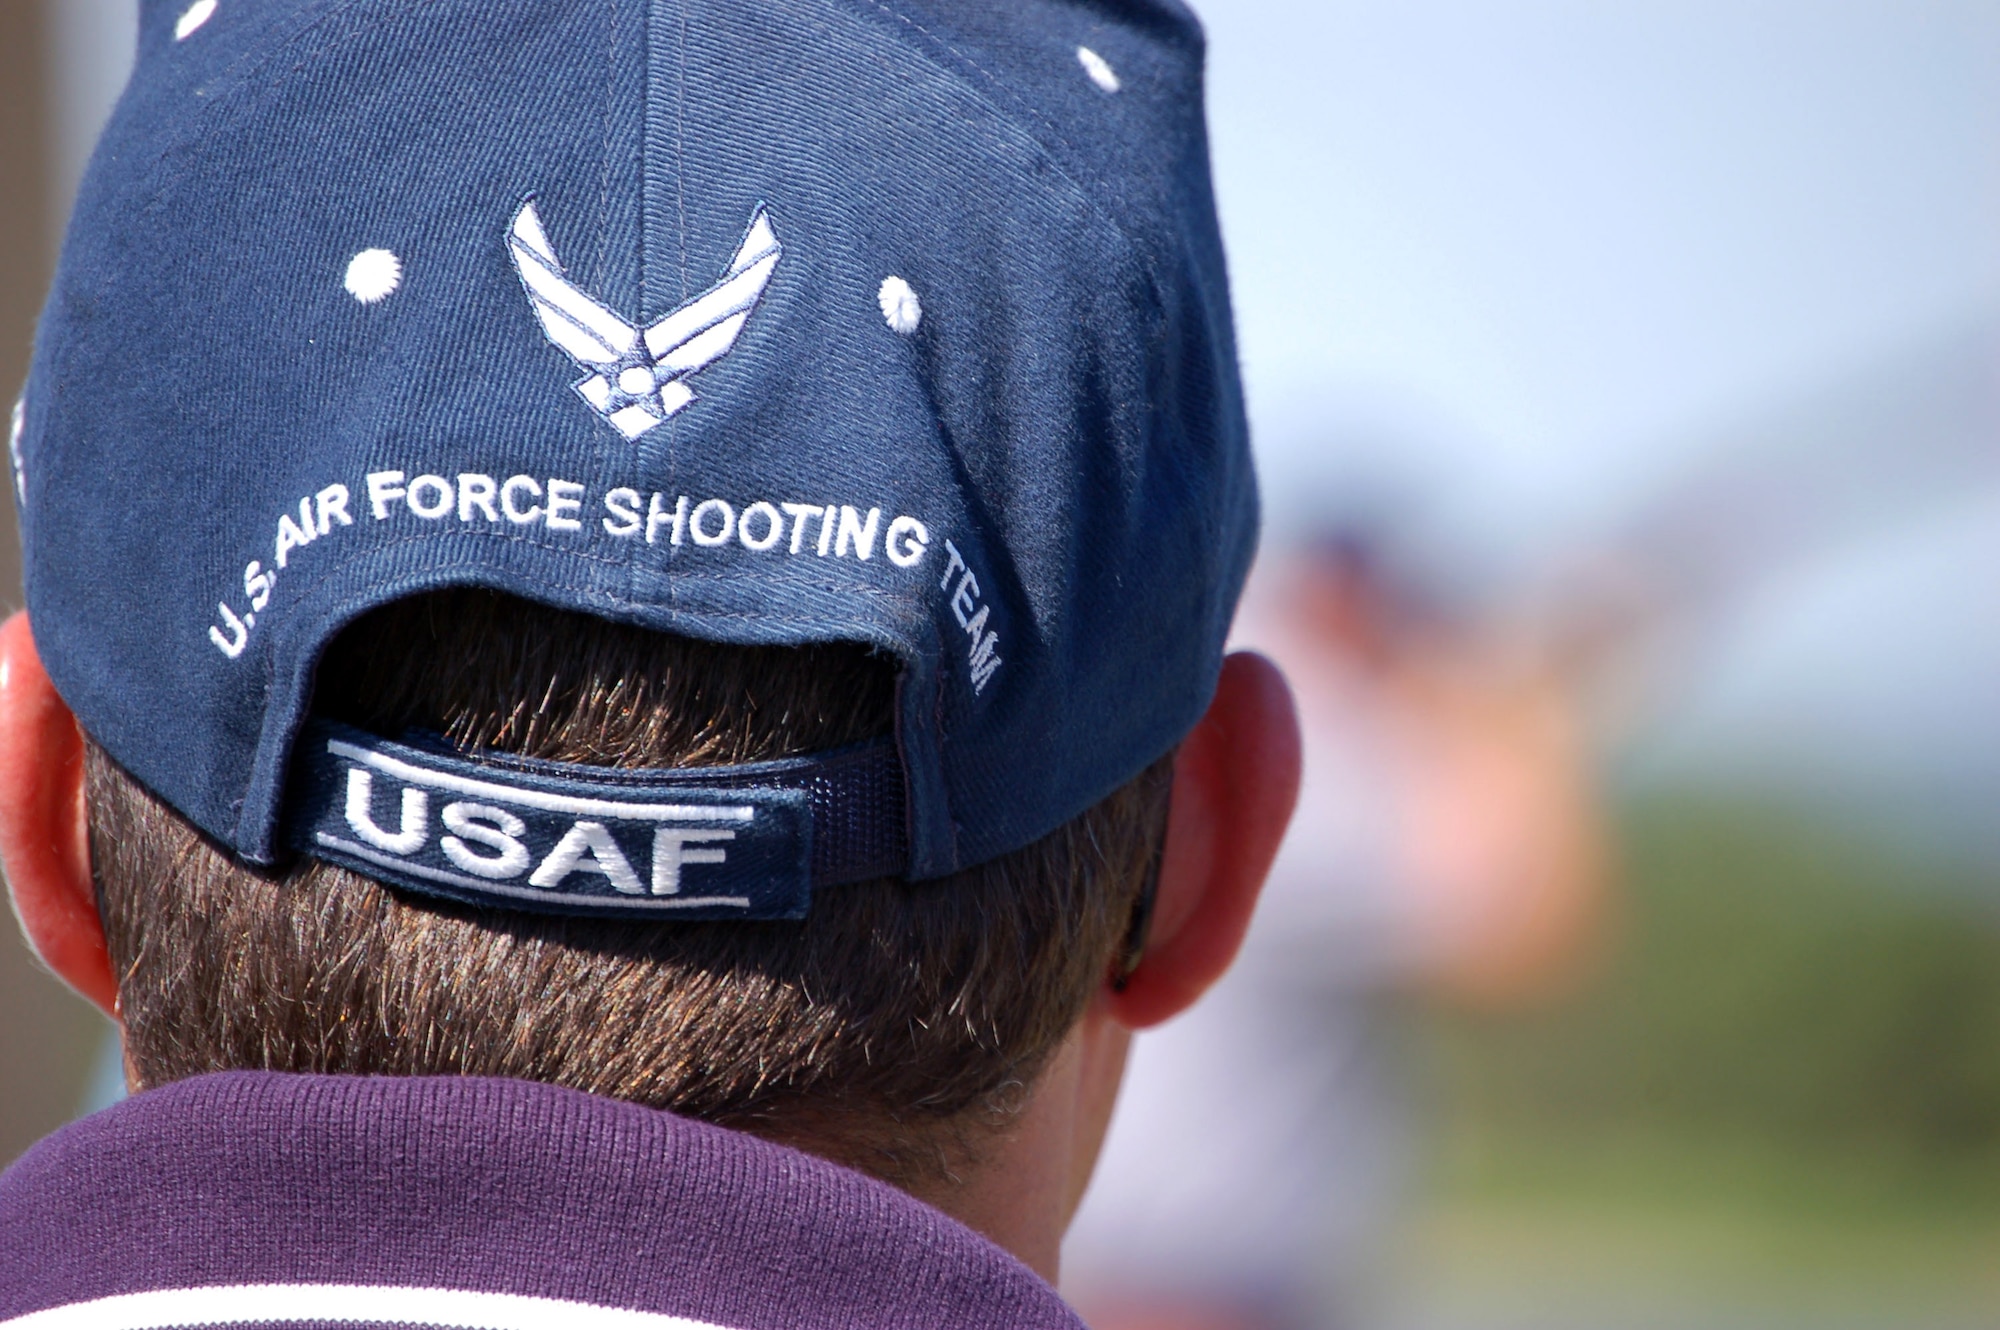 A member of the skeet shooting team looks on as squad members prepare for competition in the 2007 World Skeet Championship. Air Force teams took both first and second places among all the military teams at the competition. (U.S. Air Force photo/Staff Sgt. Jeremy Larlee)
